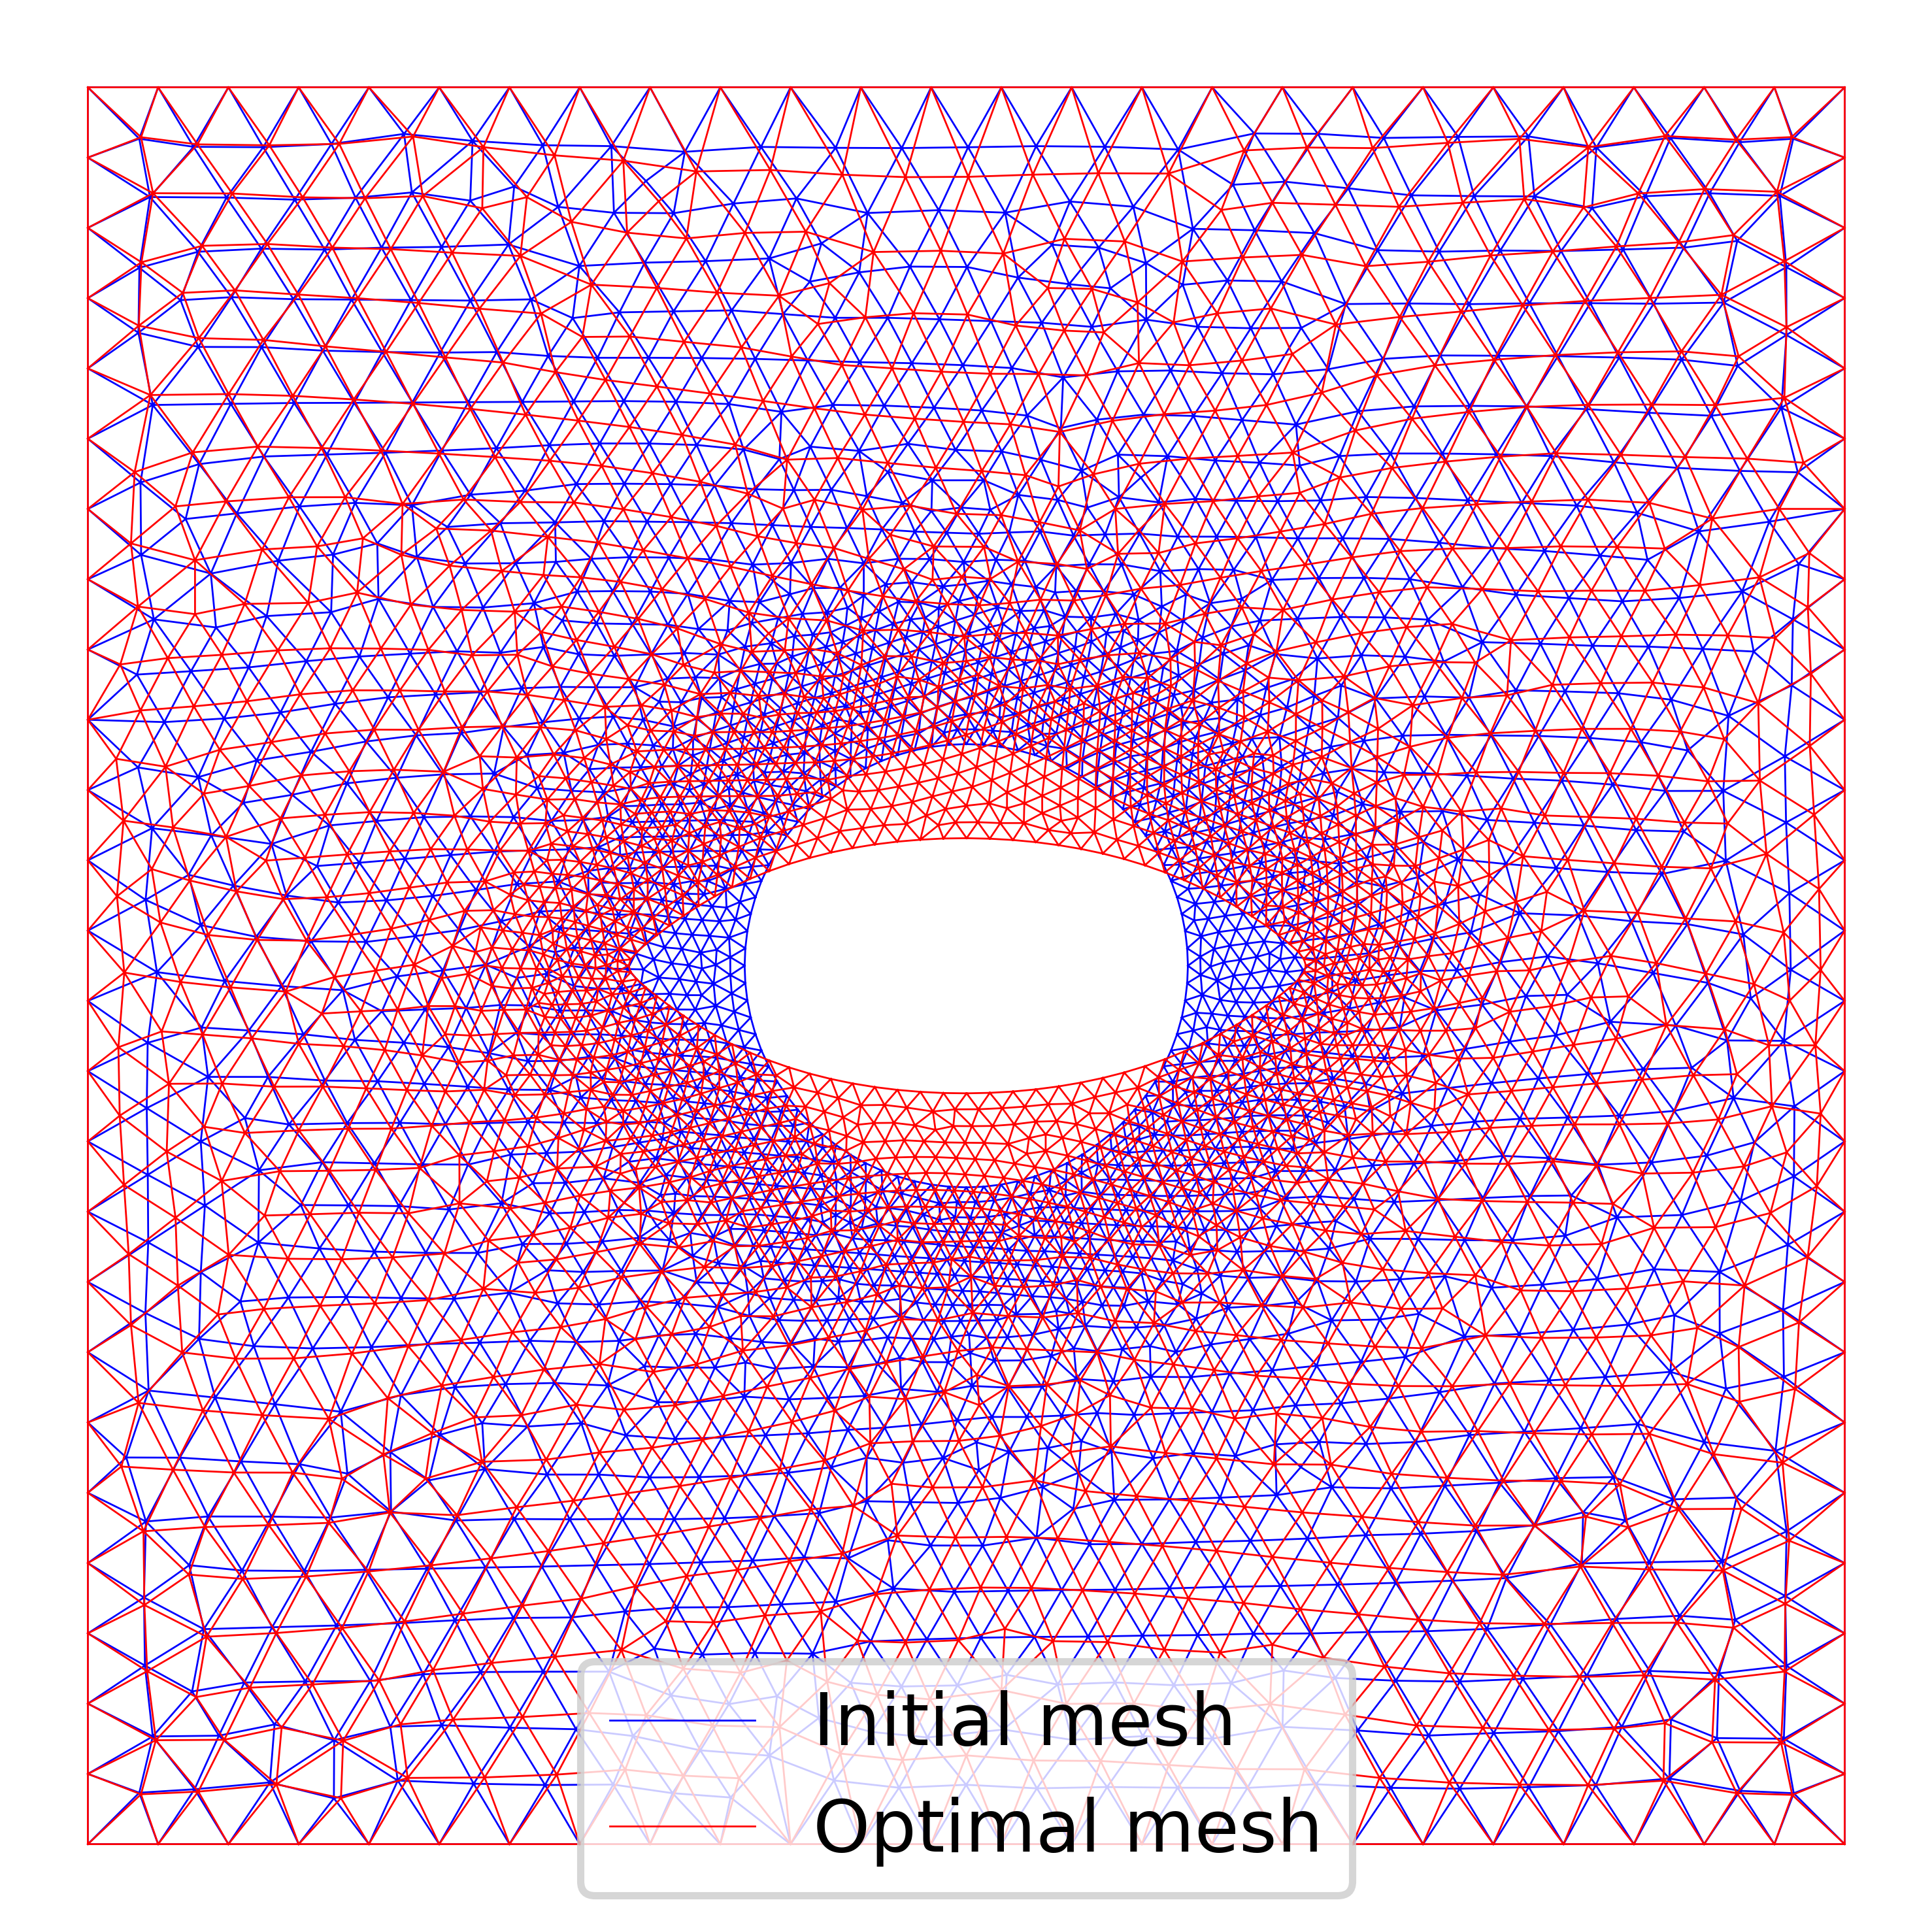 ../../_images/meshes.png